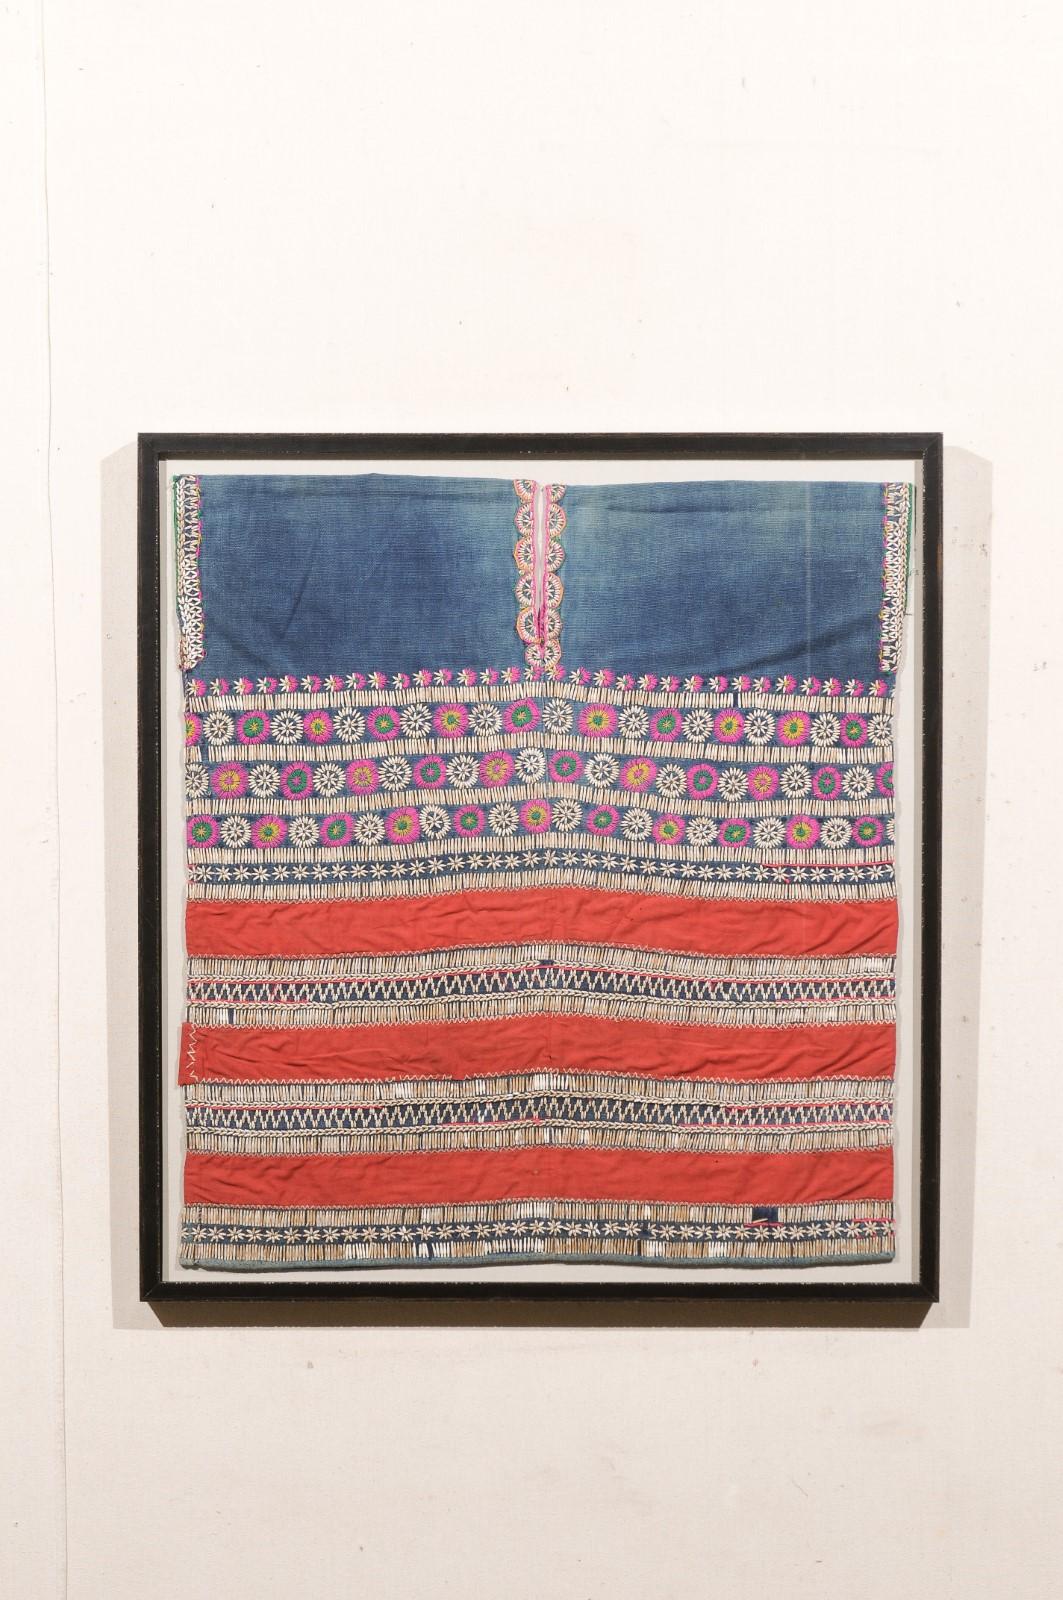 This custom framed wall art features a tunic from the Chin peoples of Burma (now called Myanmar), which has been custom framed. This early to mid 20th century tunic has a red cloth that looks like silk, along with an indigo dyed cotton, and